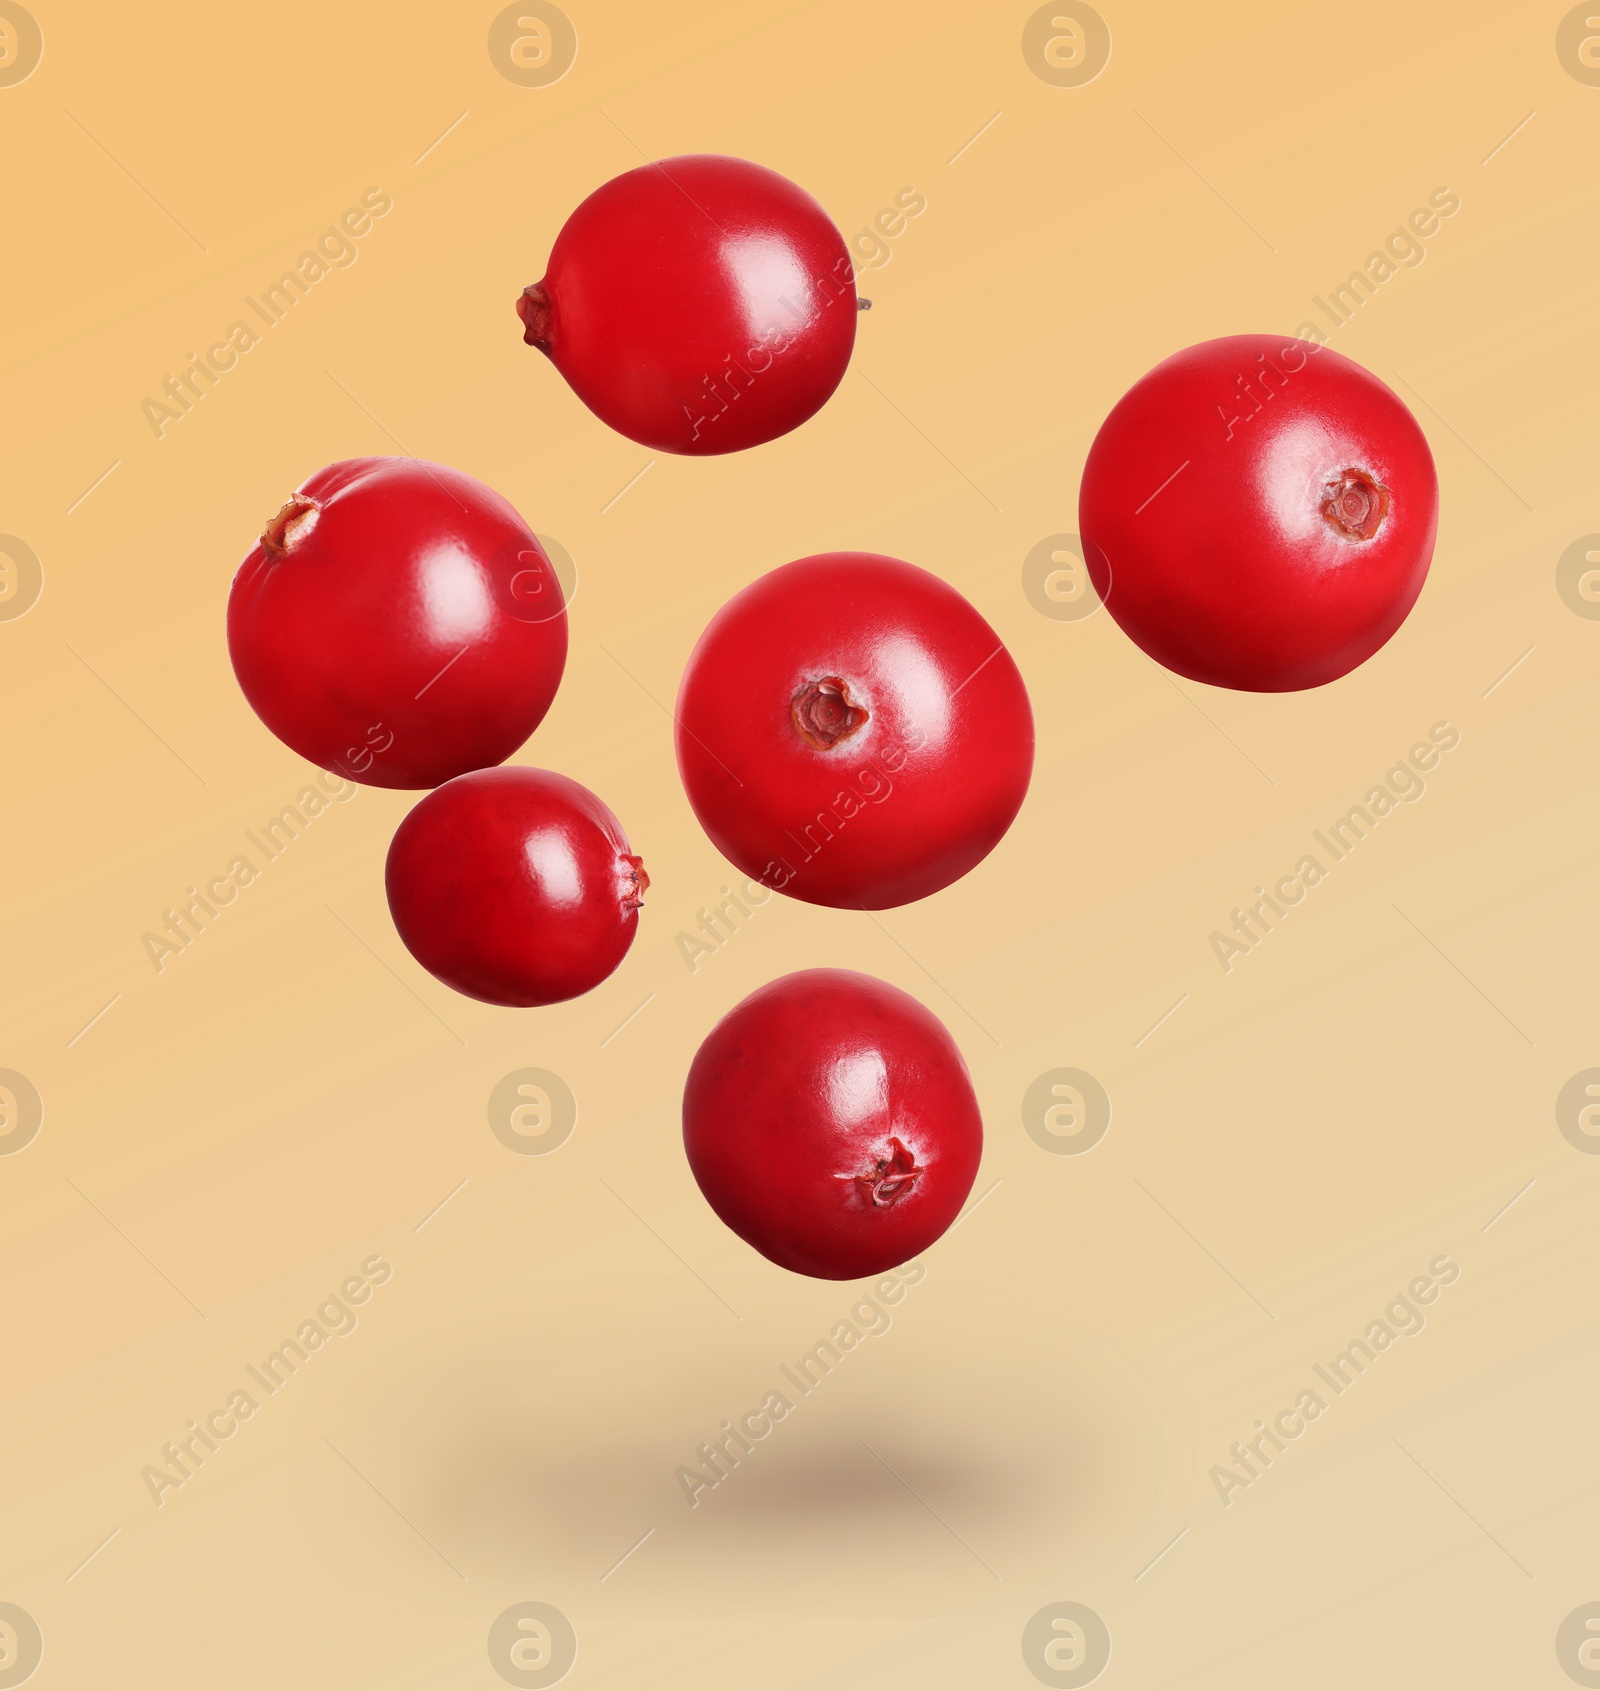 Image of Delicious ripe cranberries falling on color background